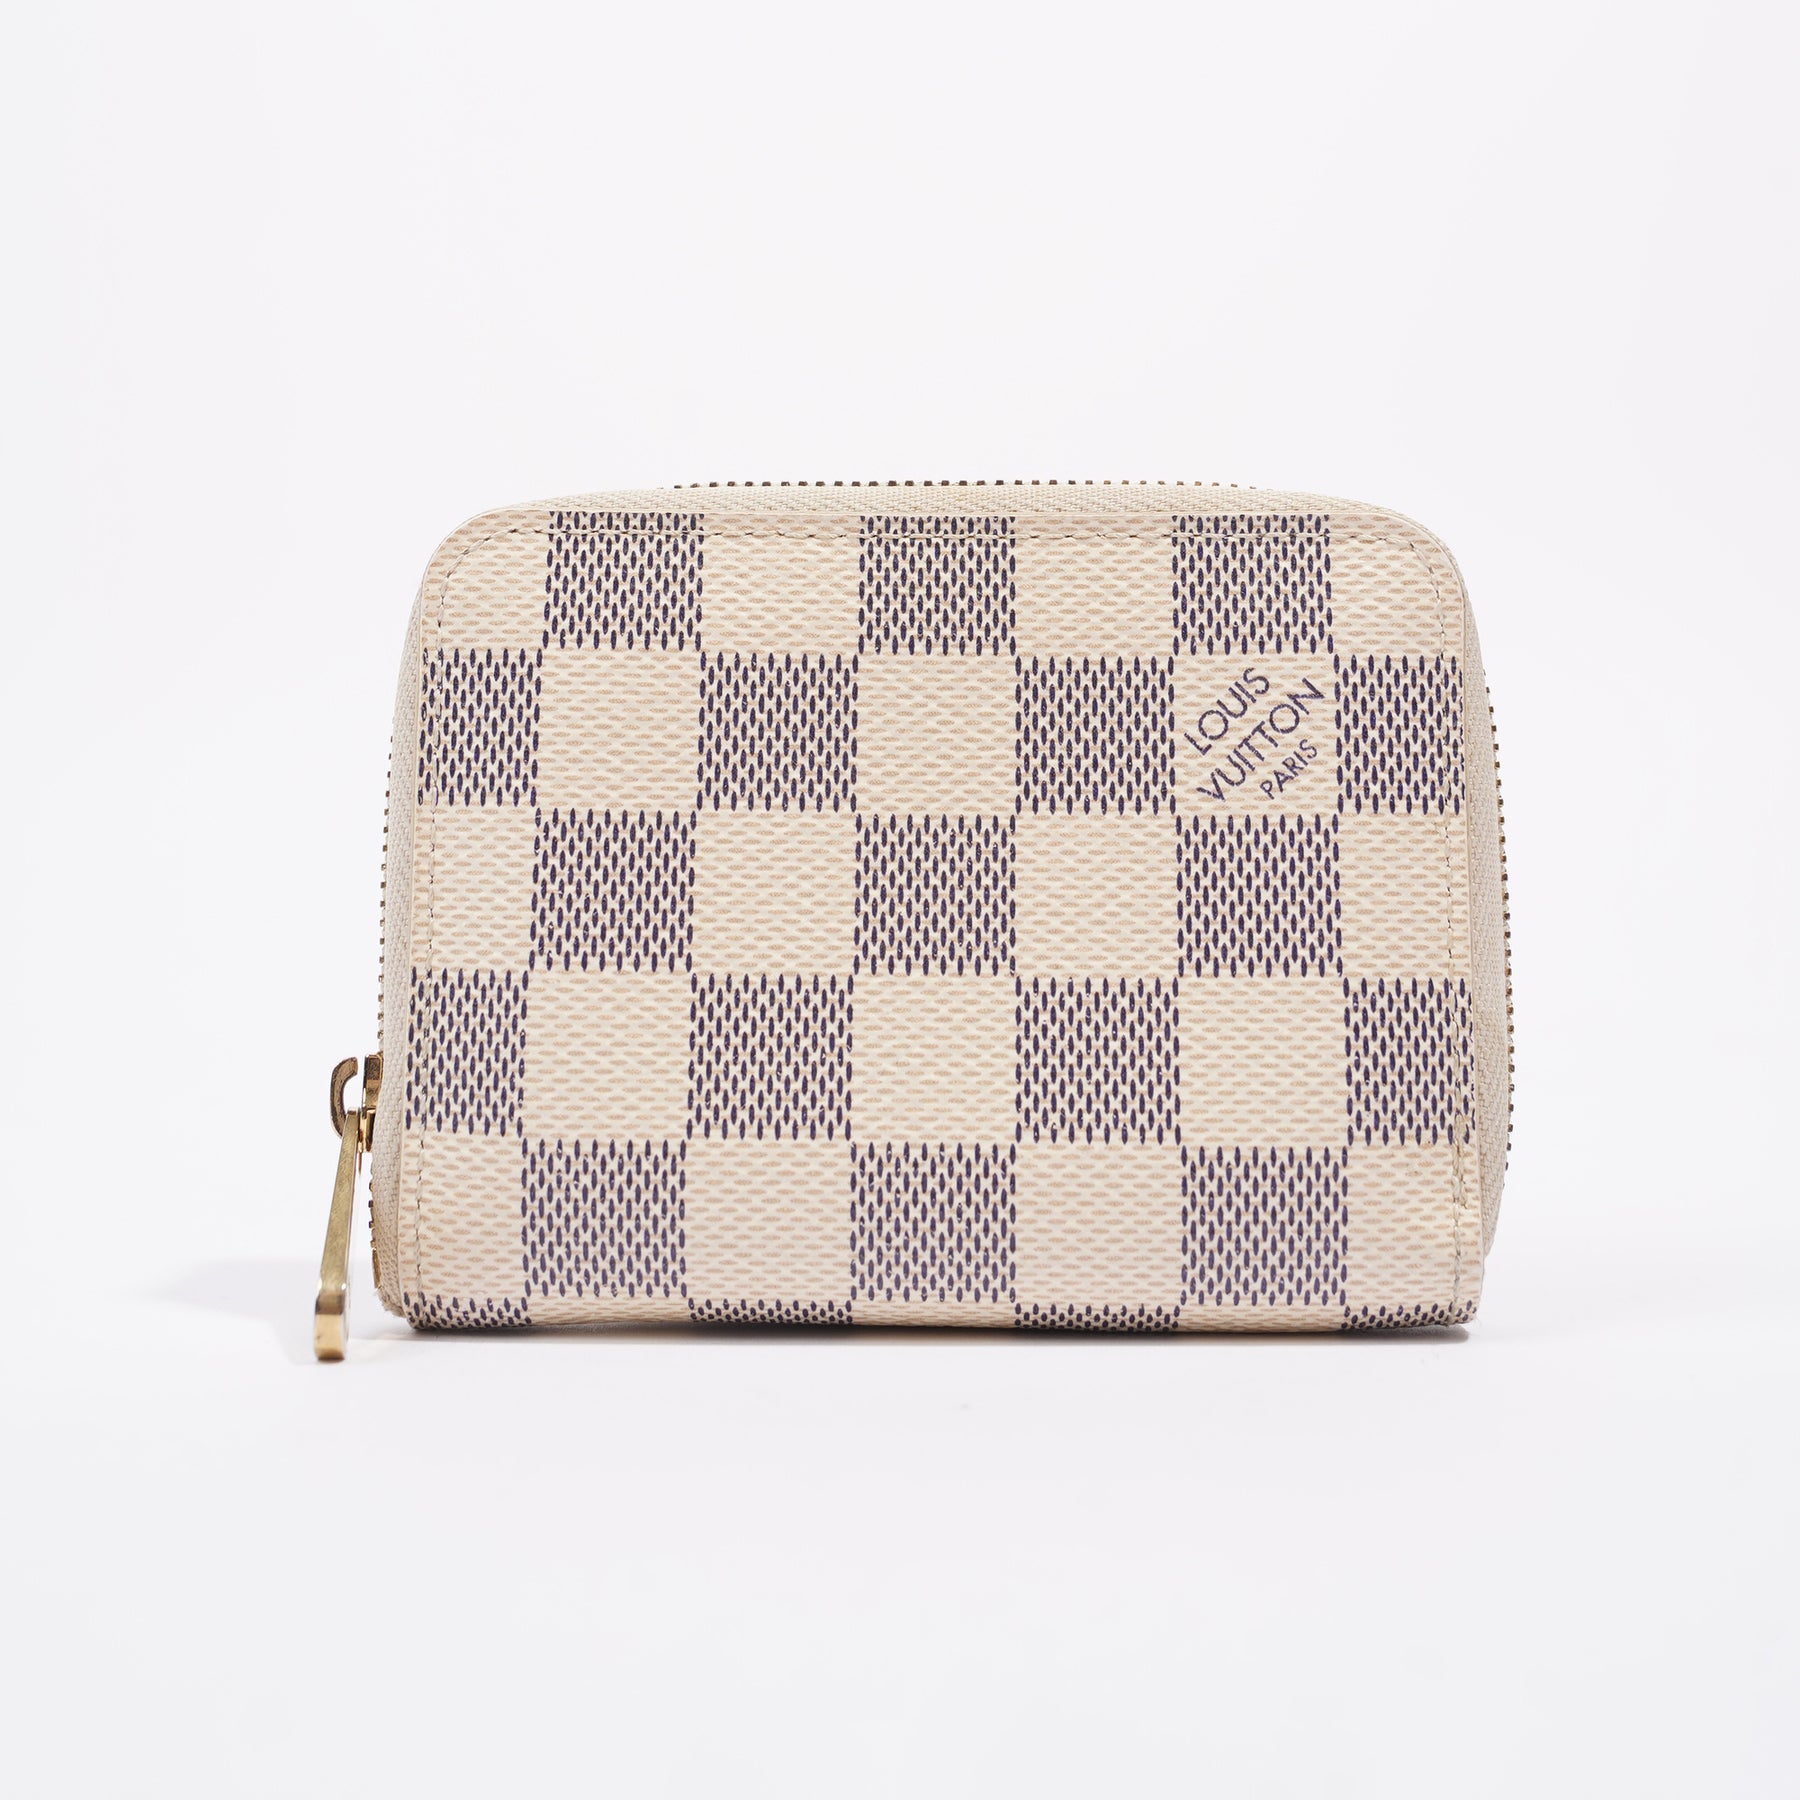 Zippy Coin Purse Damier Azur Canvas - Wallets and Small Leather Goods